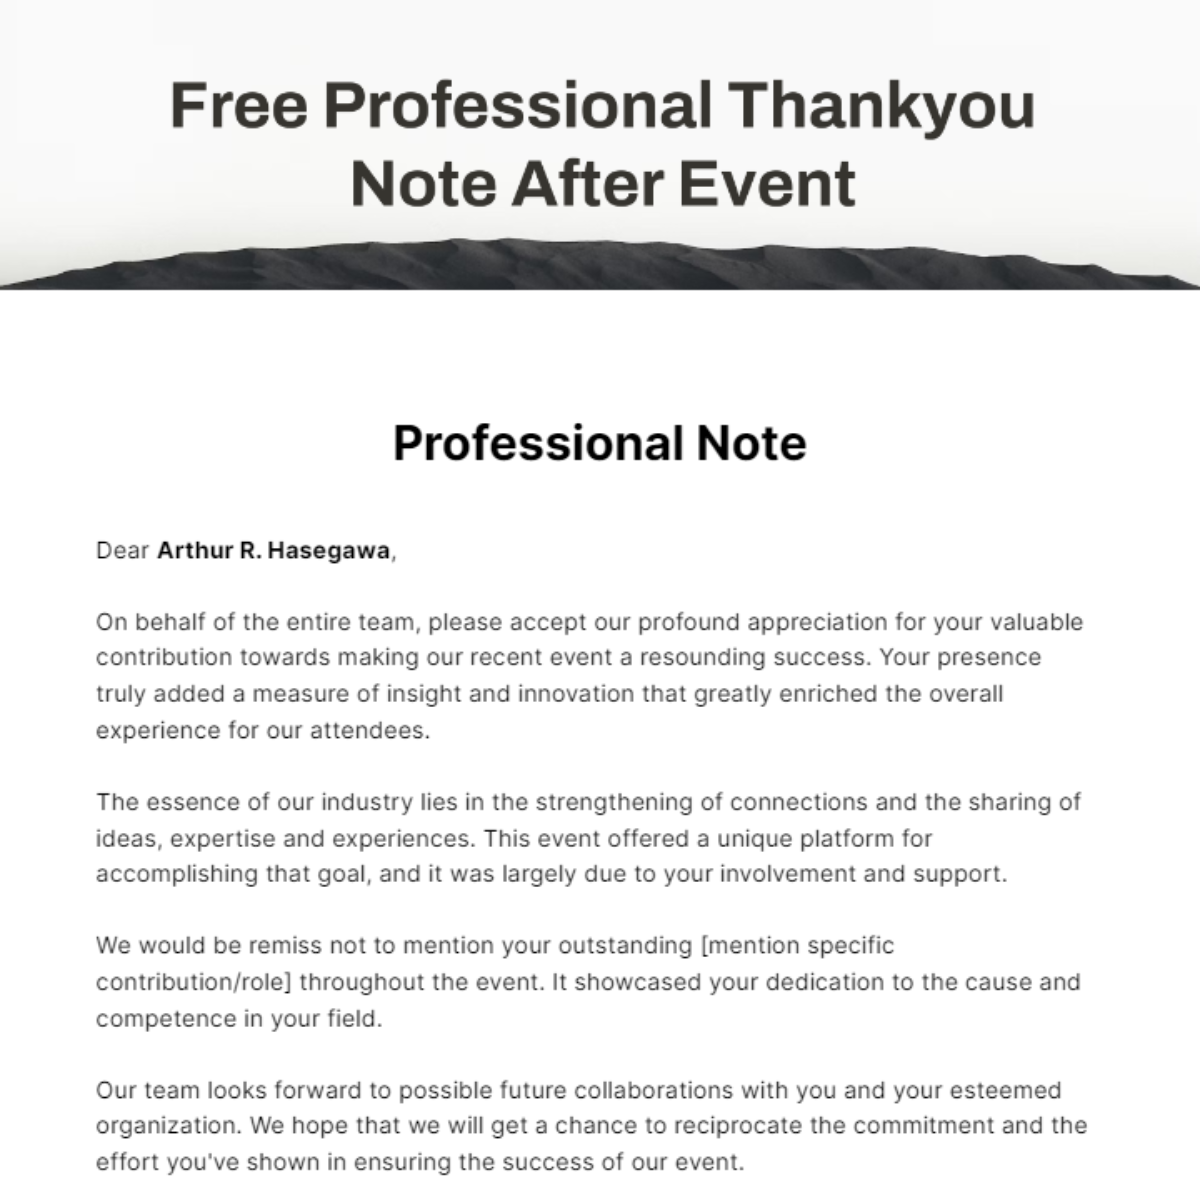 Free Professional Thankyou Note After Event Template